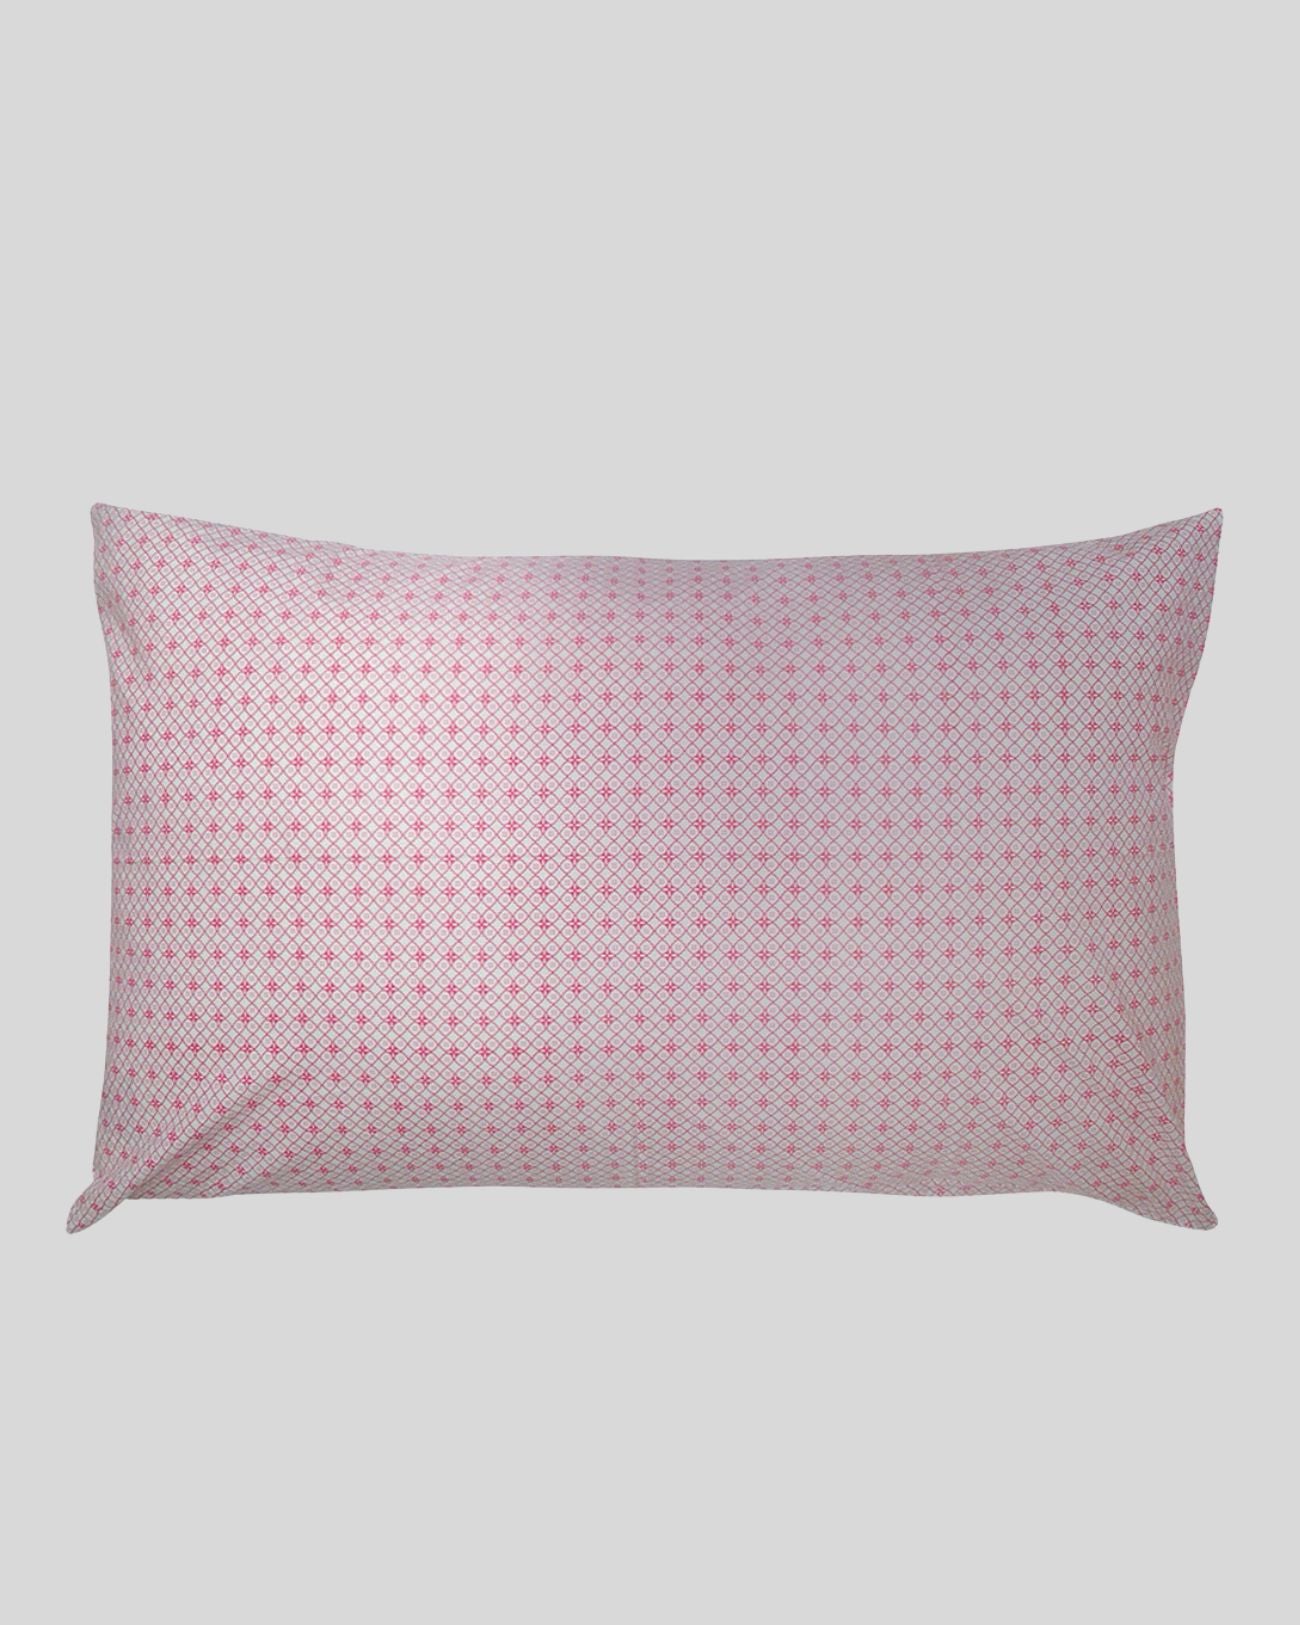 PETITE ROUGE PILLOWCASE | DISCONTINUED